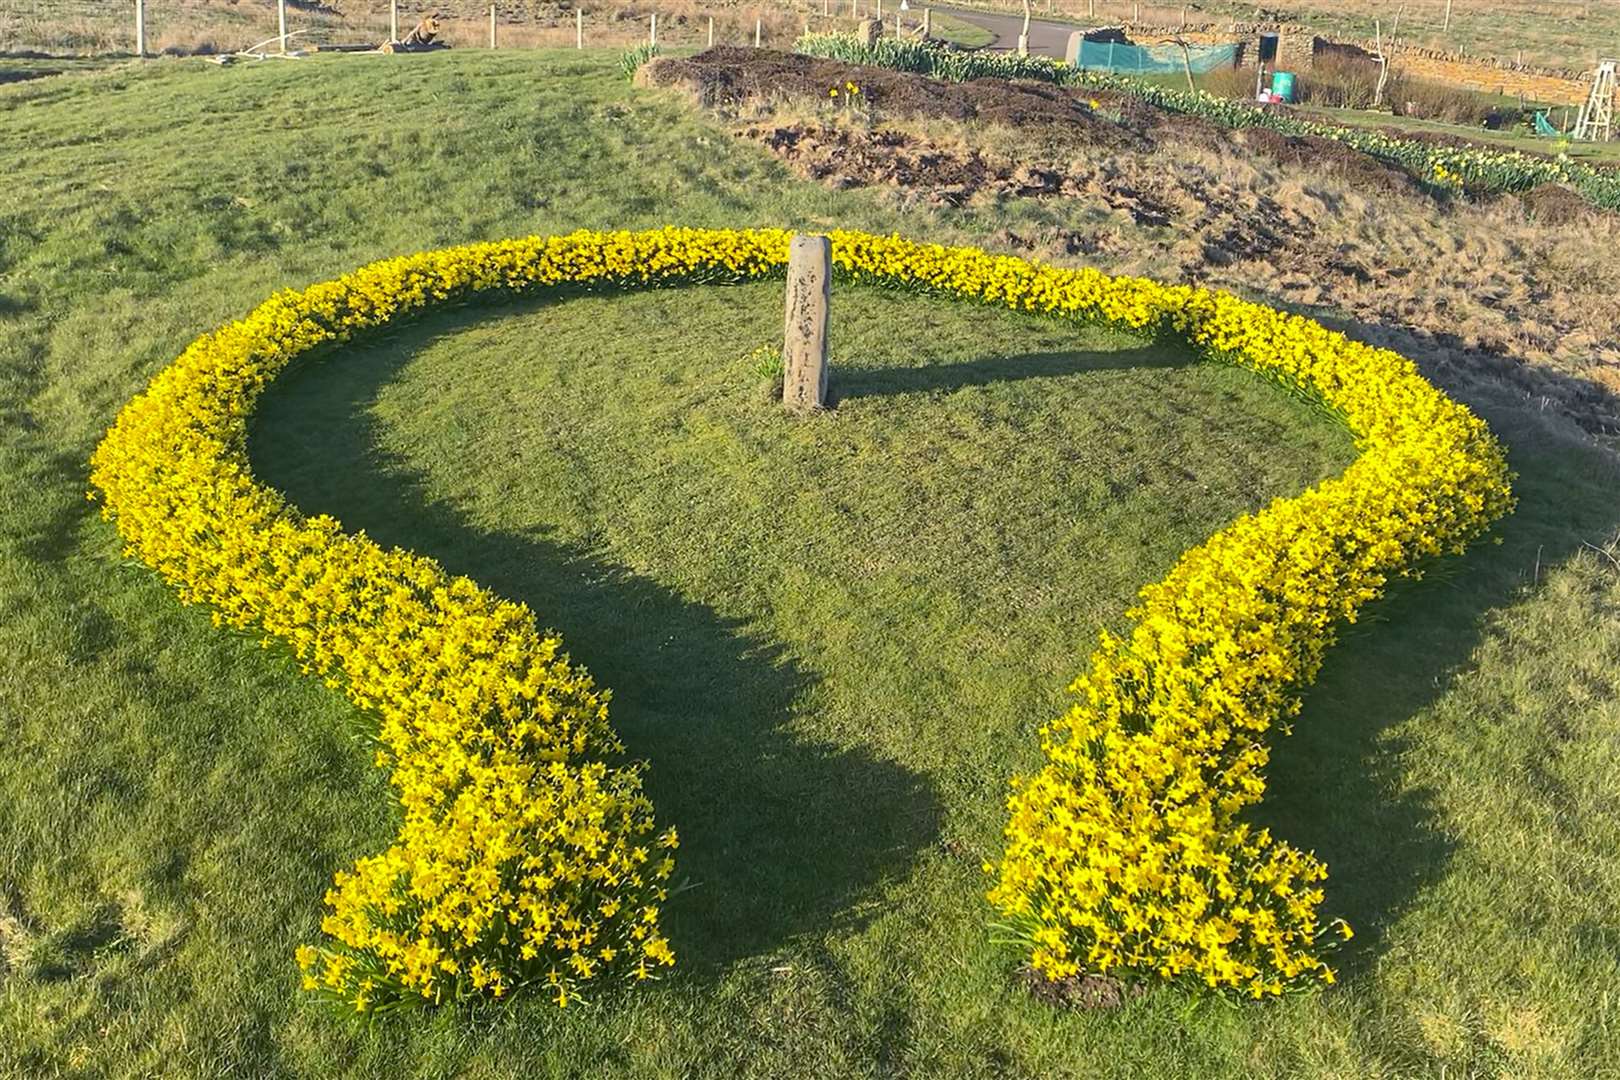 The horse-shoe shaped memorial garden with its daffodils and standing stone